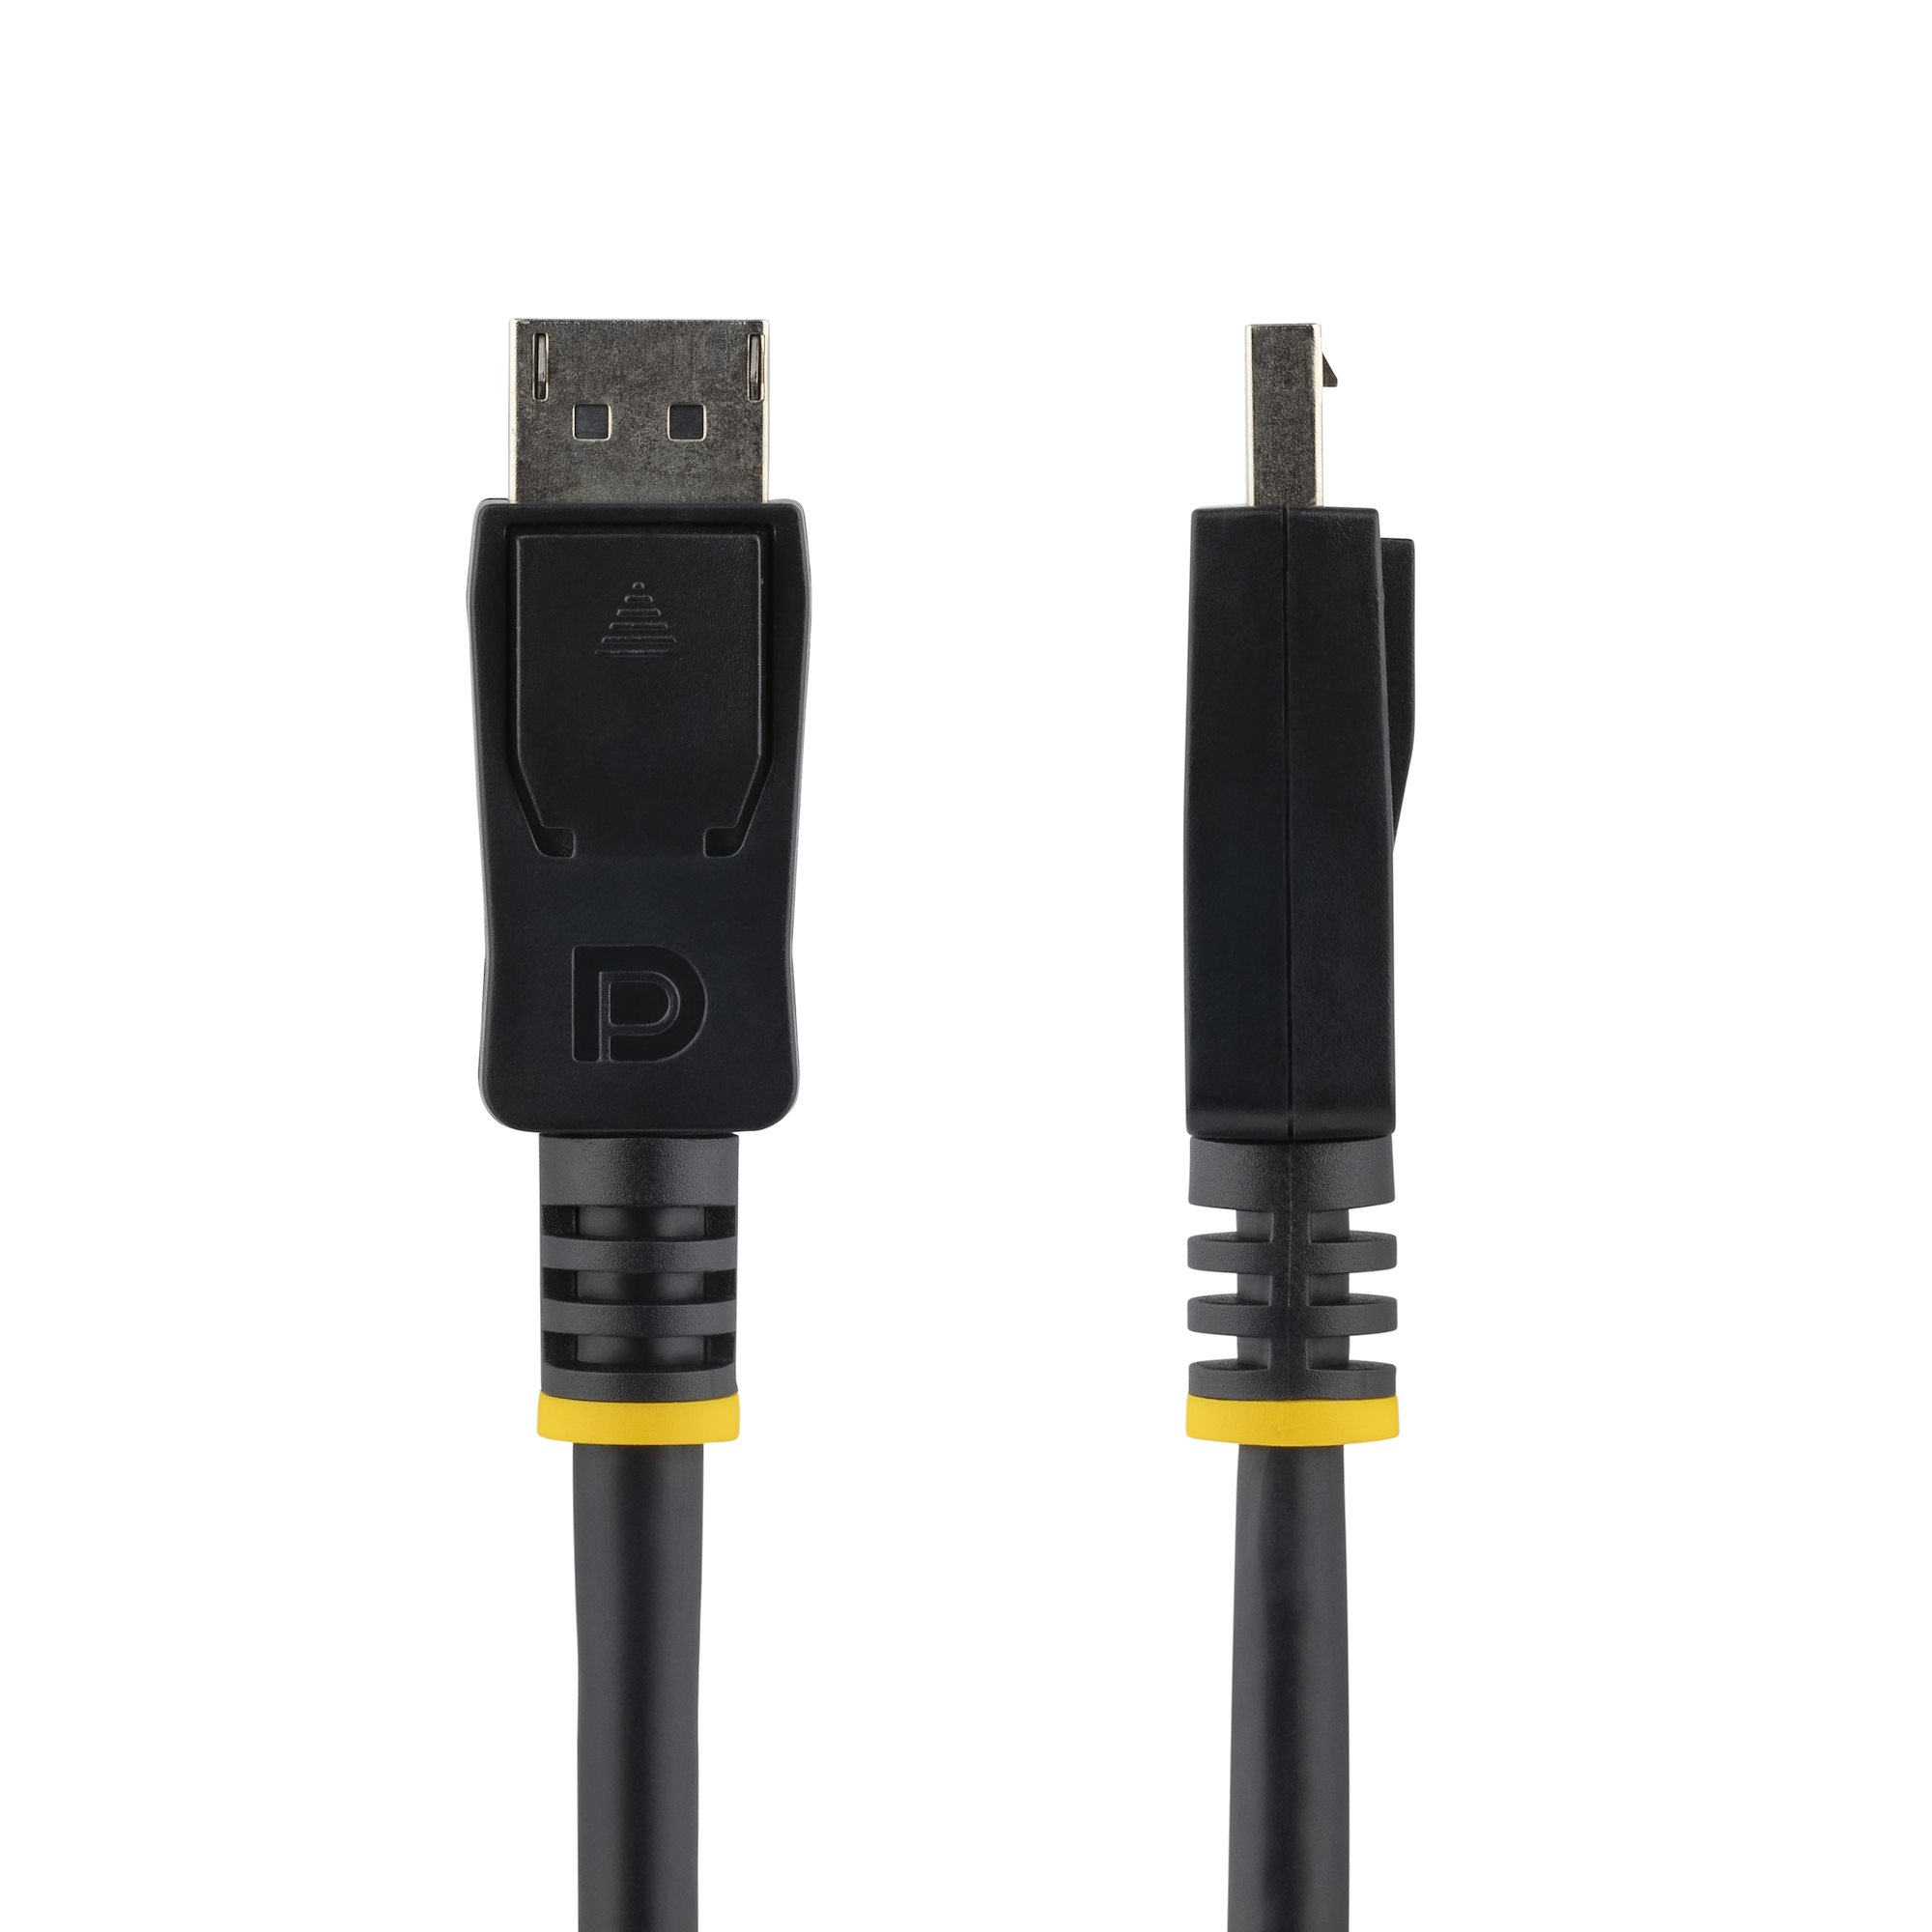 3ft VESA Certified DisplayPort 1.2 Cable - DisplayPort Cables & Adapter  Cables, Cables